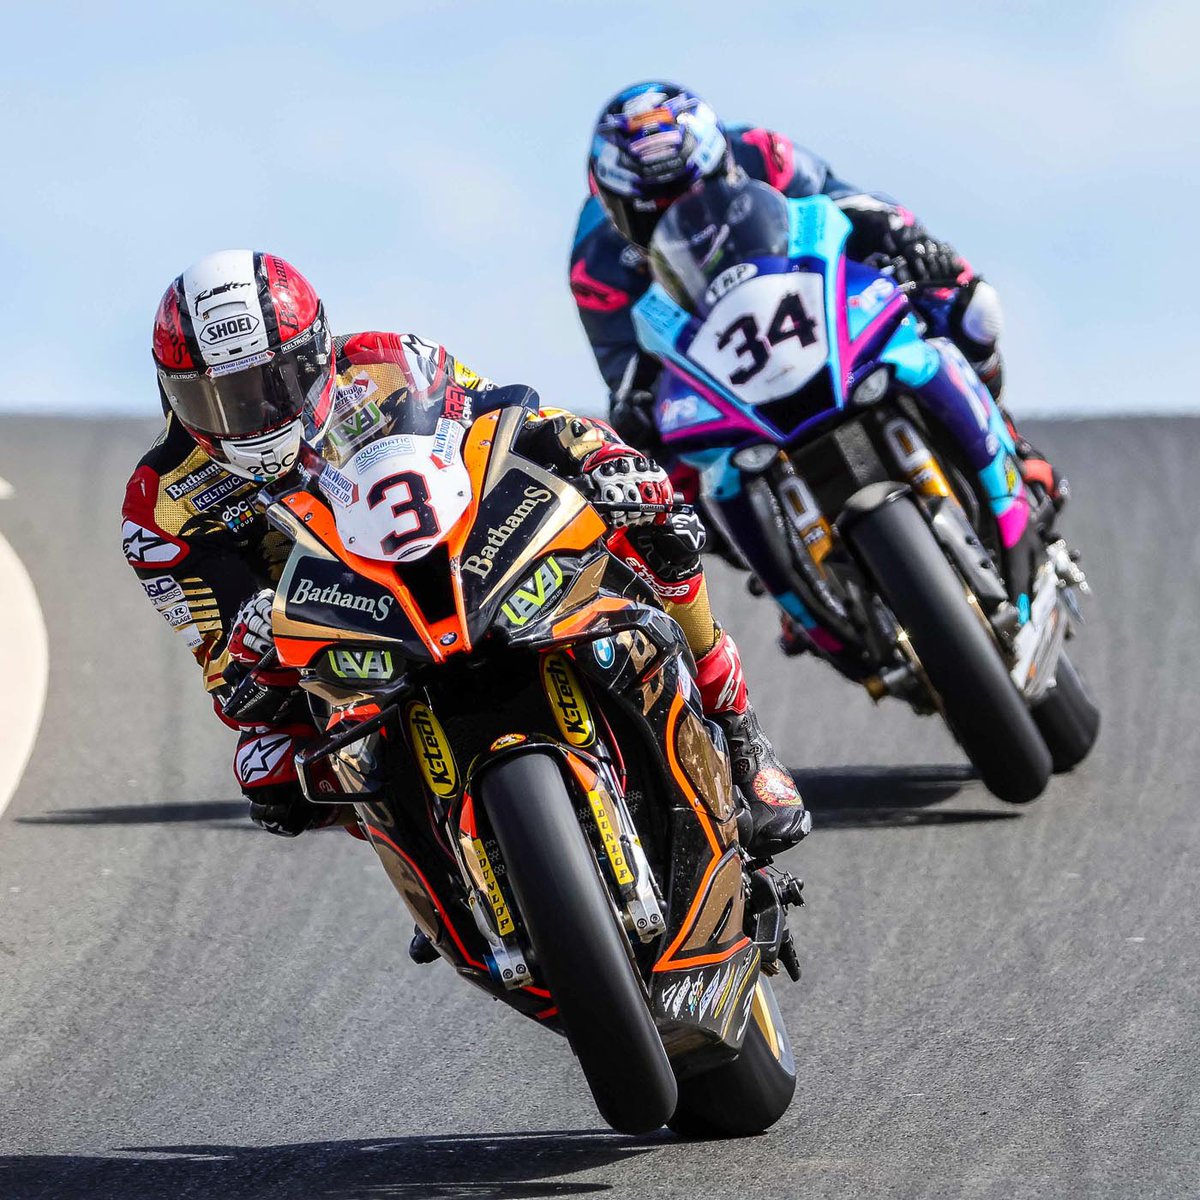 Attending the #nw200 ? 🏍️ book accommodation with our reservations team on 02820762222 or online at marinehotelballycastle.com #northwest200 #causewaycoast #discoverni #visitcauseway